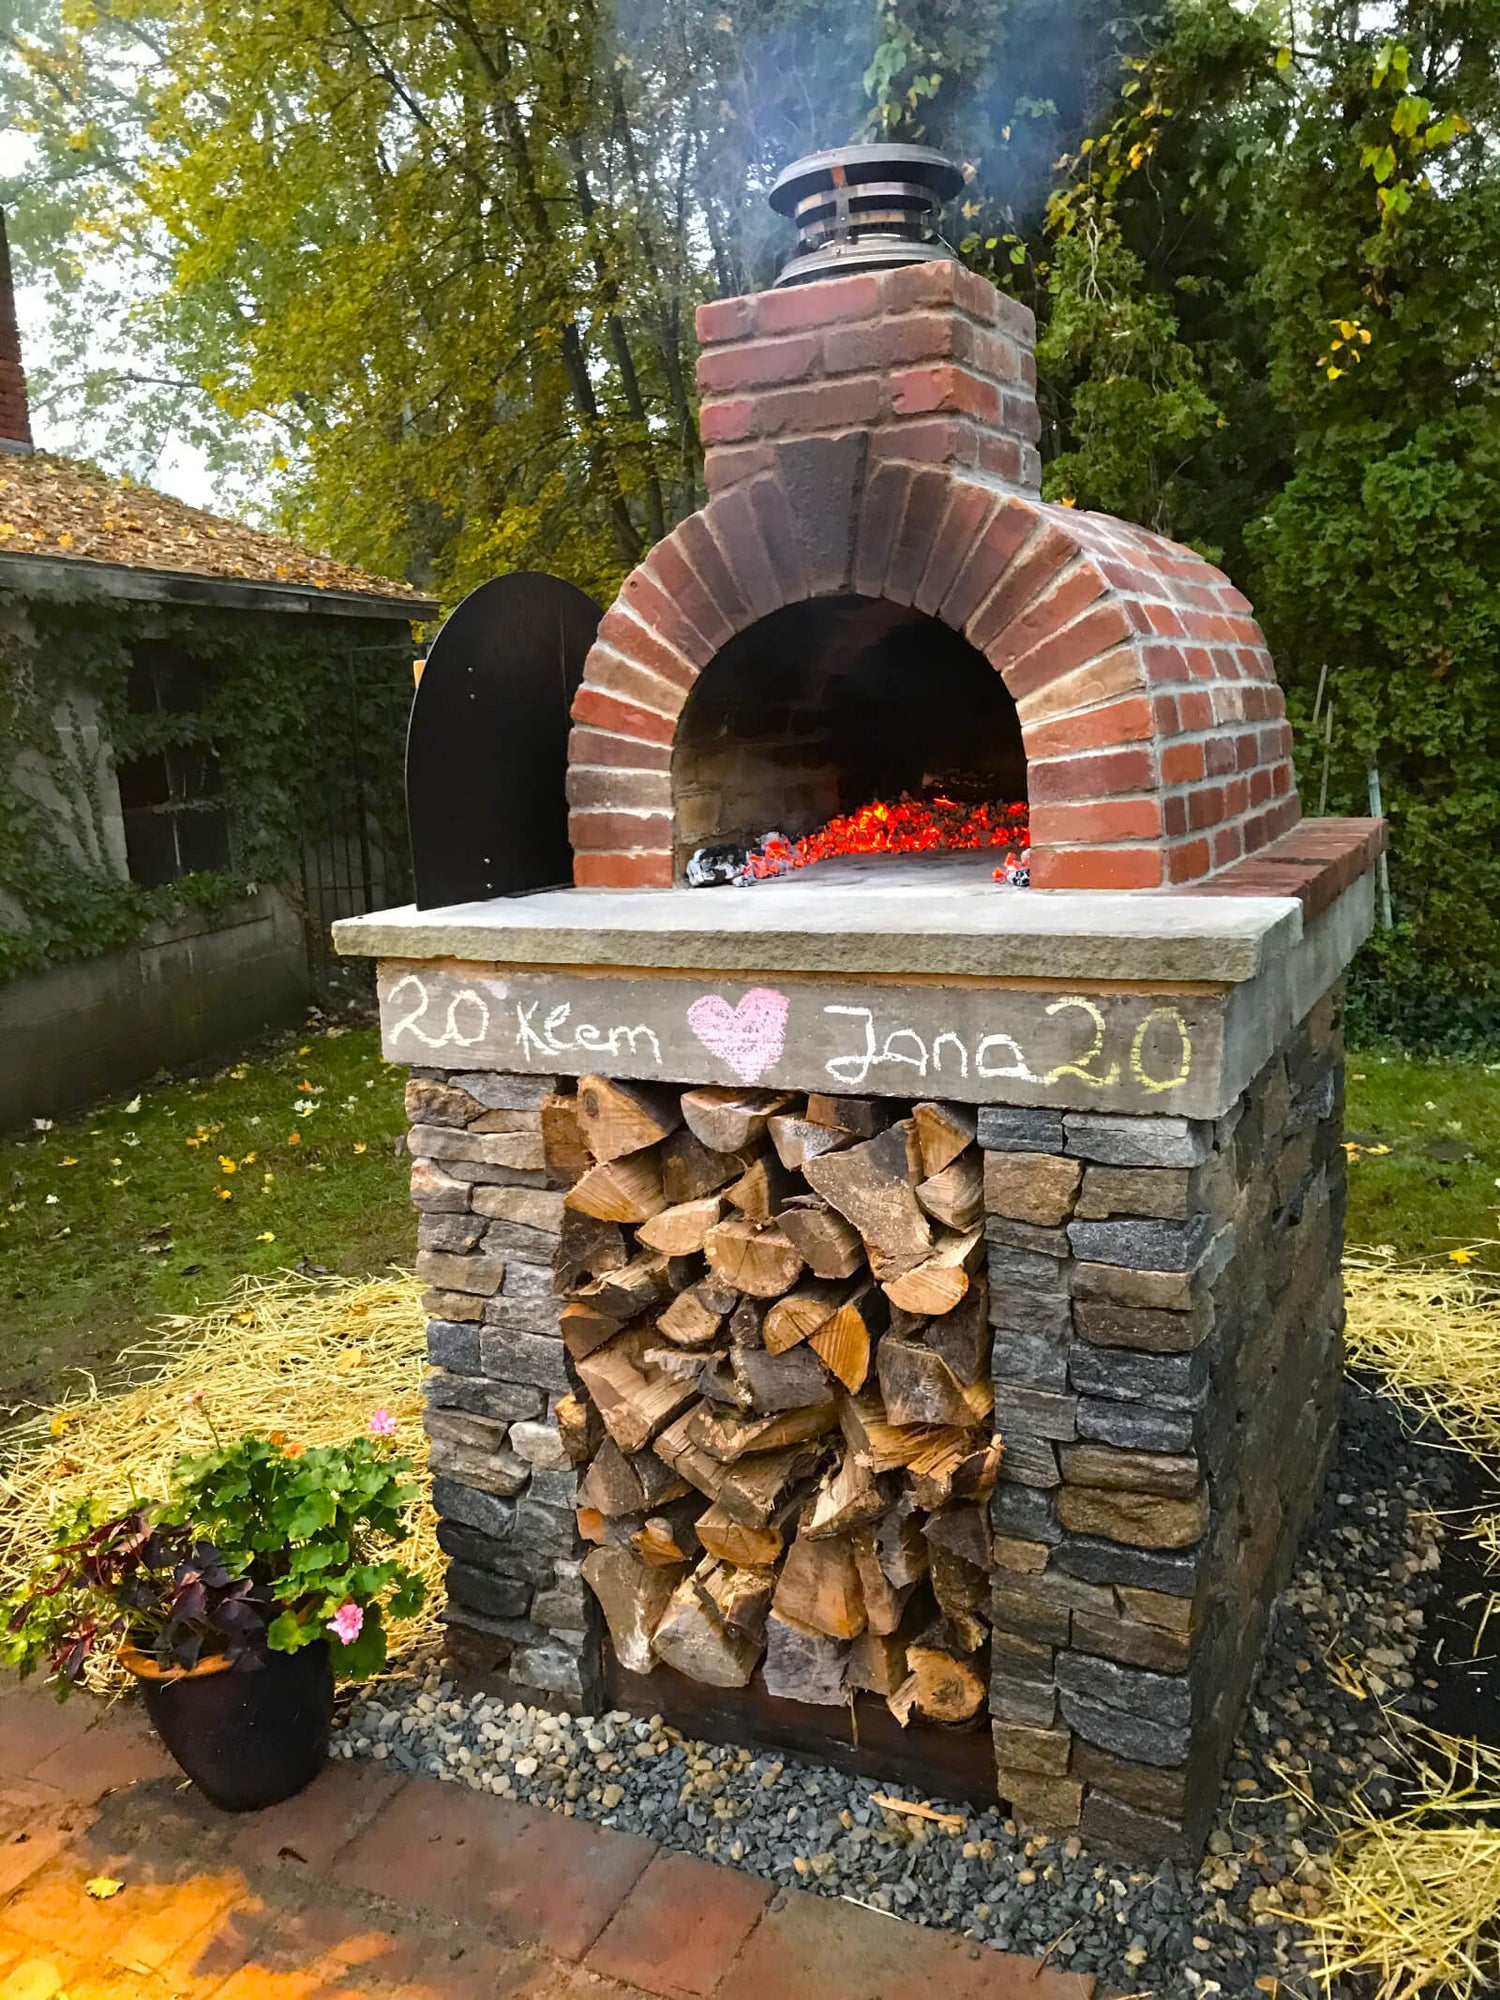 Outdoor Stone Pizza Oven – BrickWood Ovens